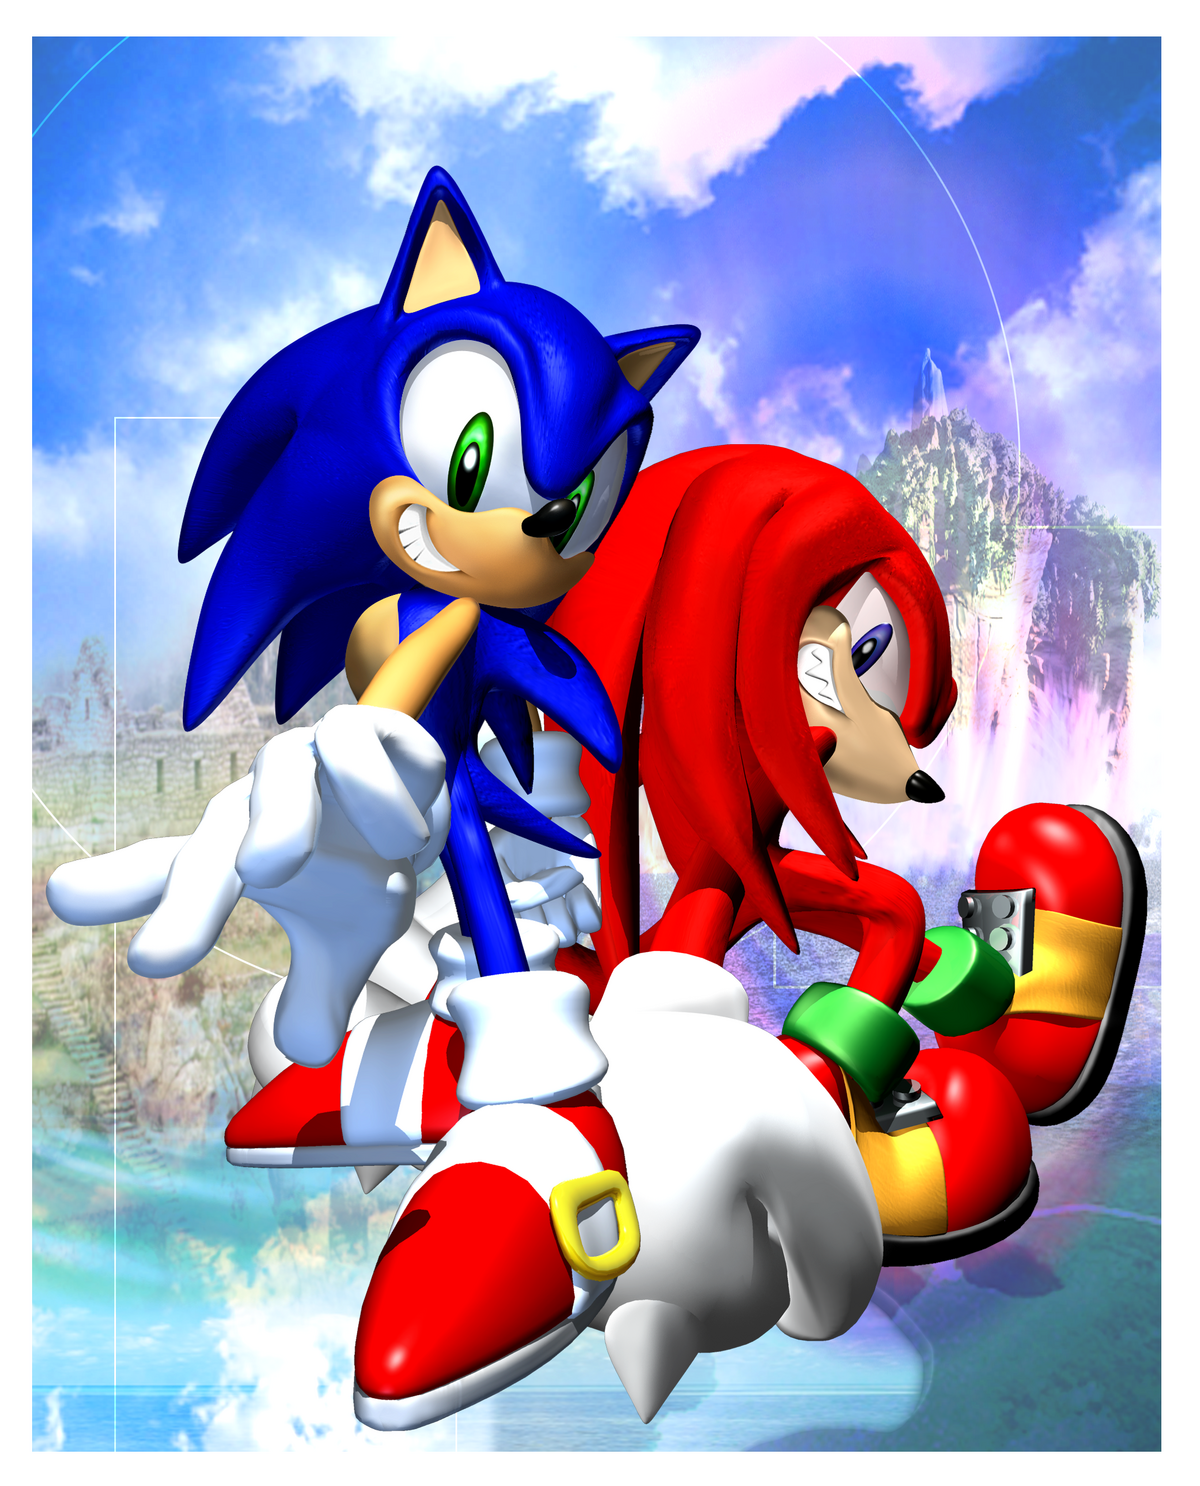 sonic the hedgehog, amy rose, shadow the hedgehog, knuckles the